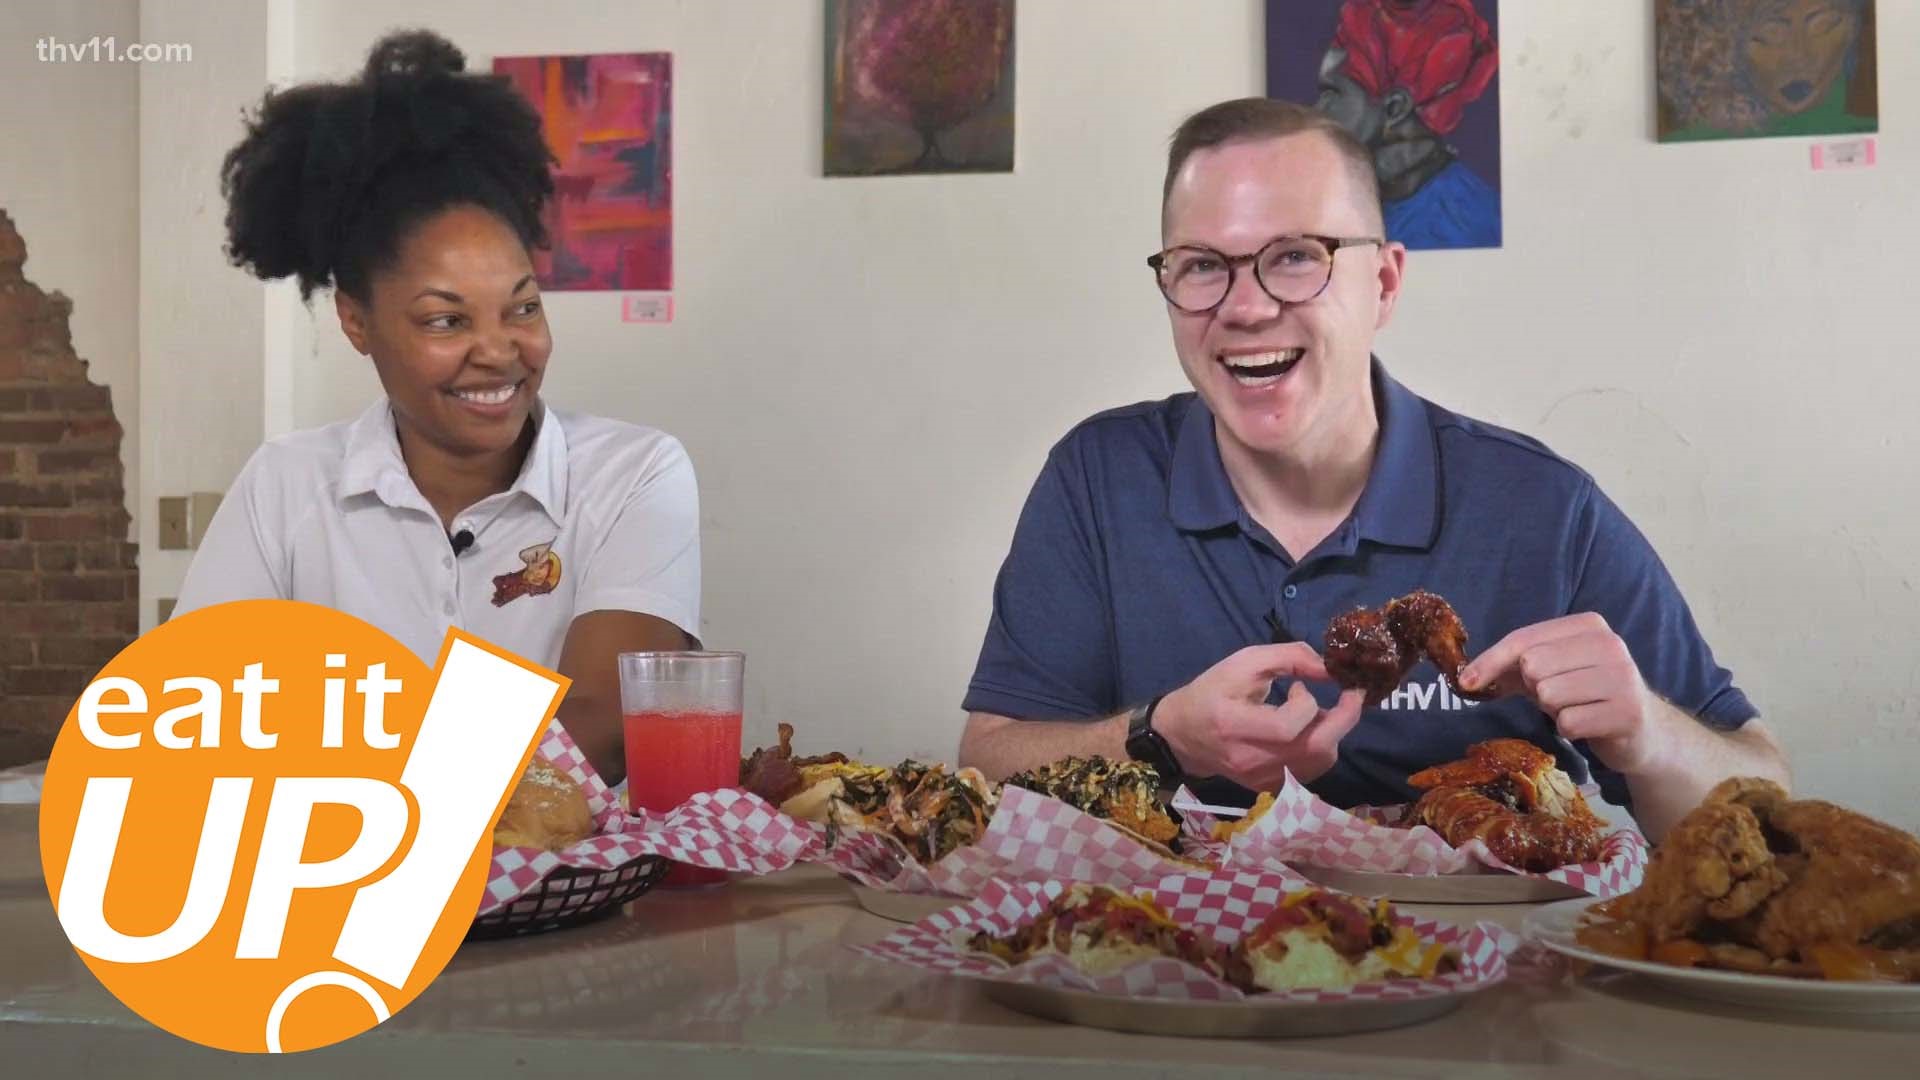 On this week's Eat It Up, Skot Covert visits Fat Jaws Soul Food & Southern Eats, a family-owned and operated Little Rock restaurant serving up food from the heart.